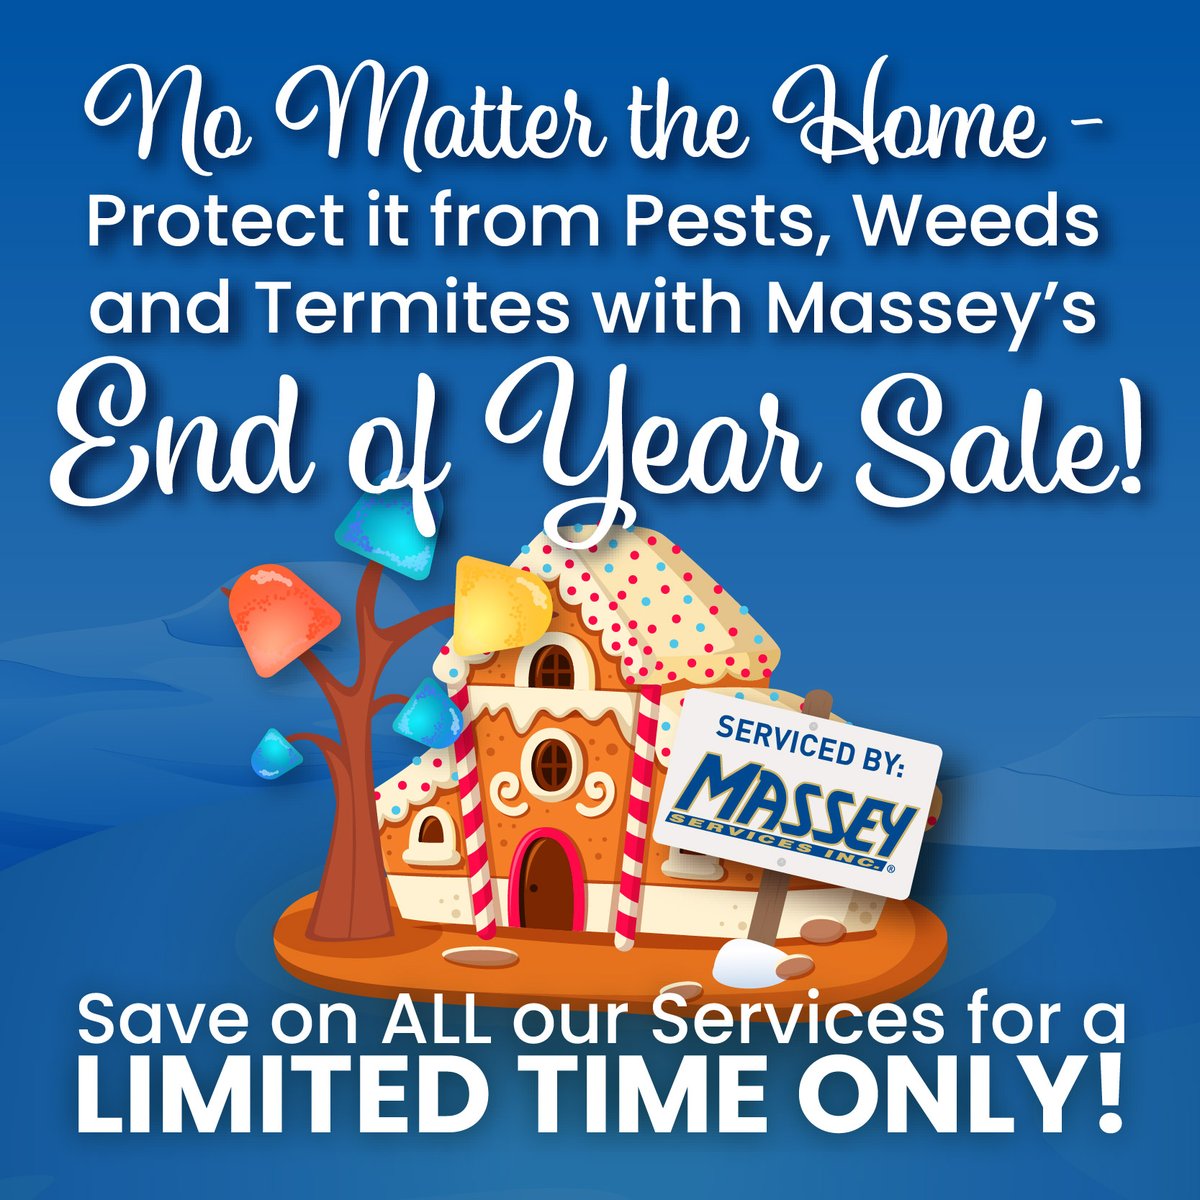 Get sweet savings now with Massey Services! Up to 20% off our services! This limited-time offer includes Pest Prevention, Termite Protection, Landscape Services, Irrigation Maintenance, Mosquito Services, Rodent Exclusion and more! #sweetsavings #endofyearsale #limitedtimeoffer